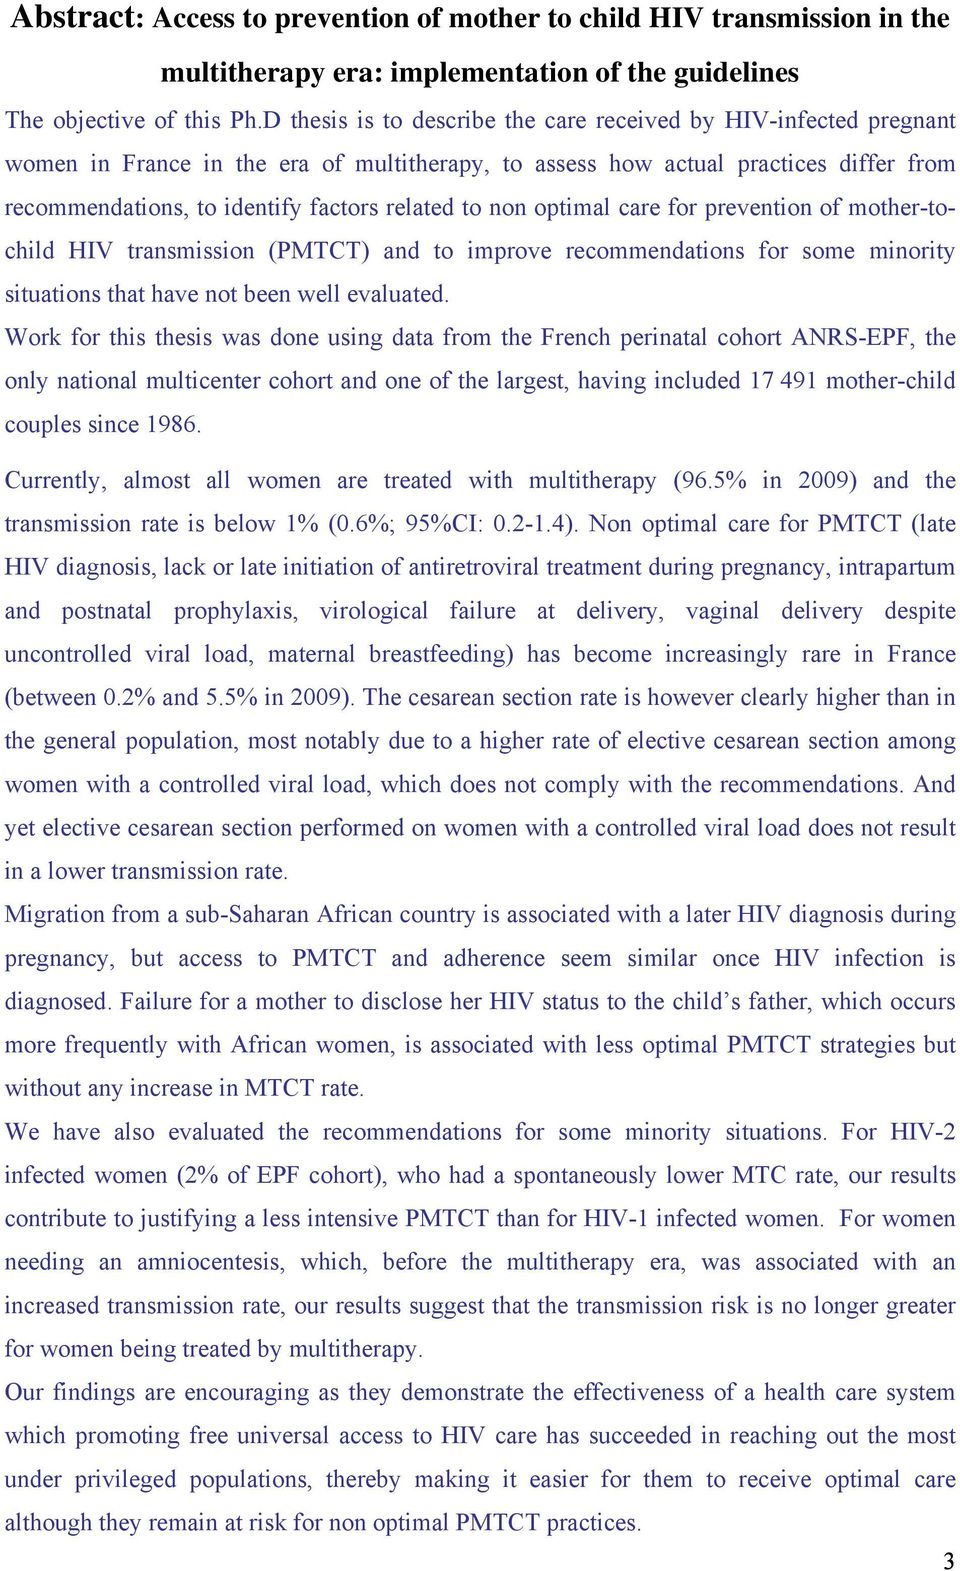 to non optimal care for prevention of mother-tochild HIV transmission (PMTCT) and to improve recommendations for some minority situations that have not been well evaluated.